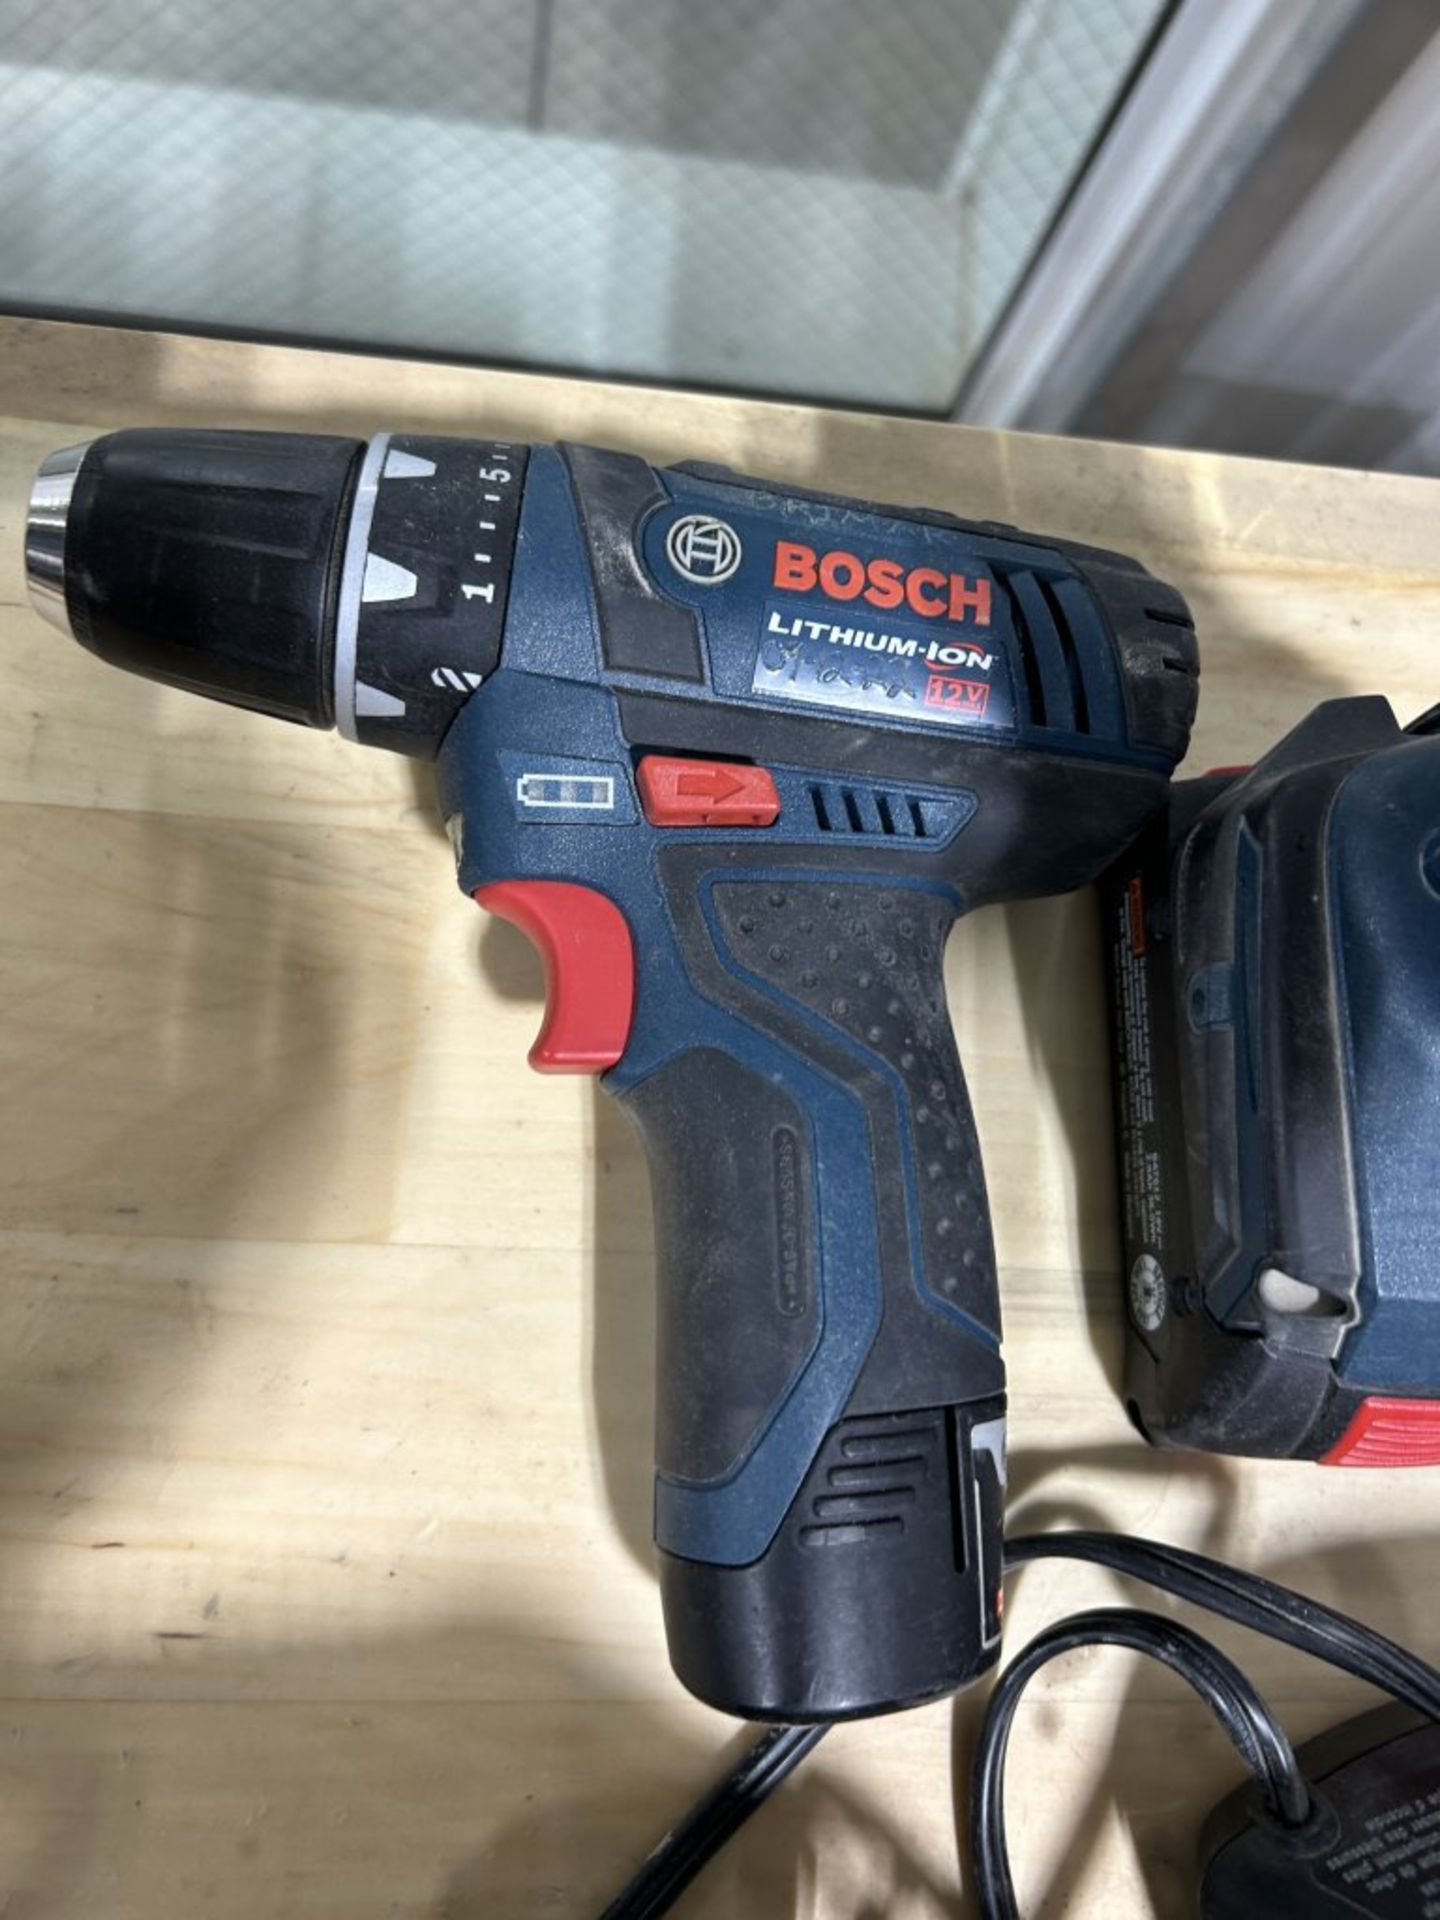 BOSCH LITHIUM ION 18V & 12V CORDLESS DRILLS, EACH WITH 2 BATTERIES AND CHARGER - Bild 3 aus 3